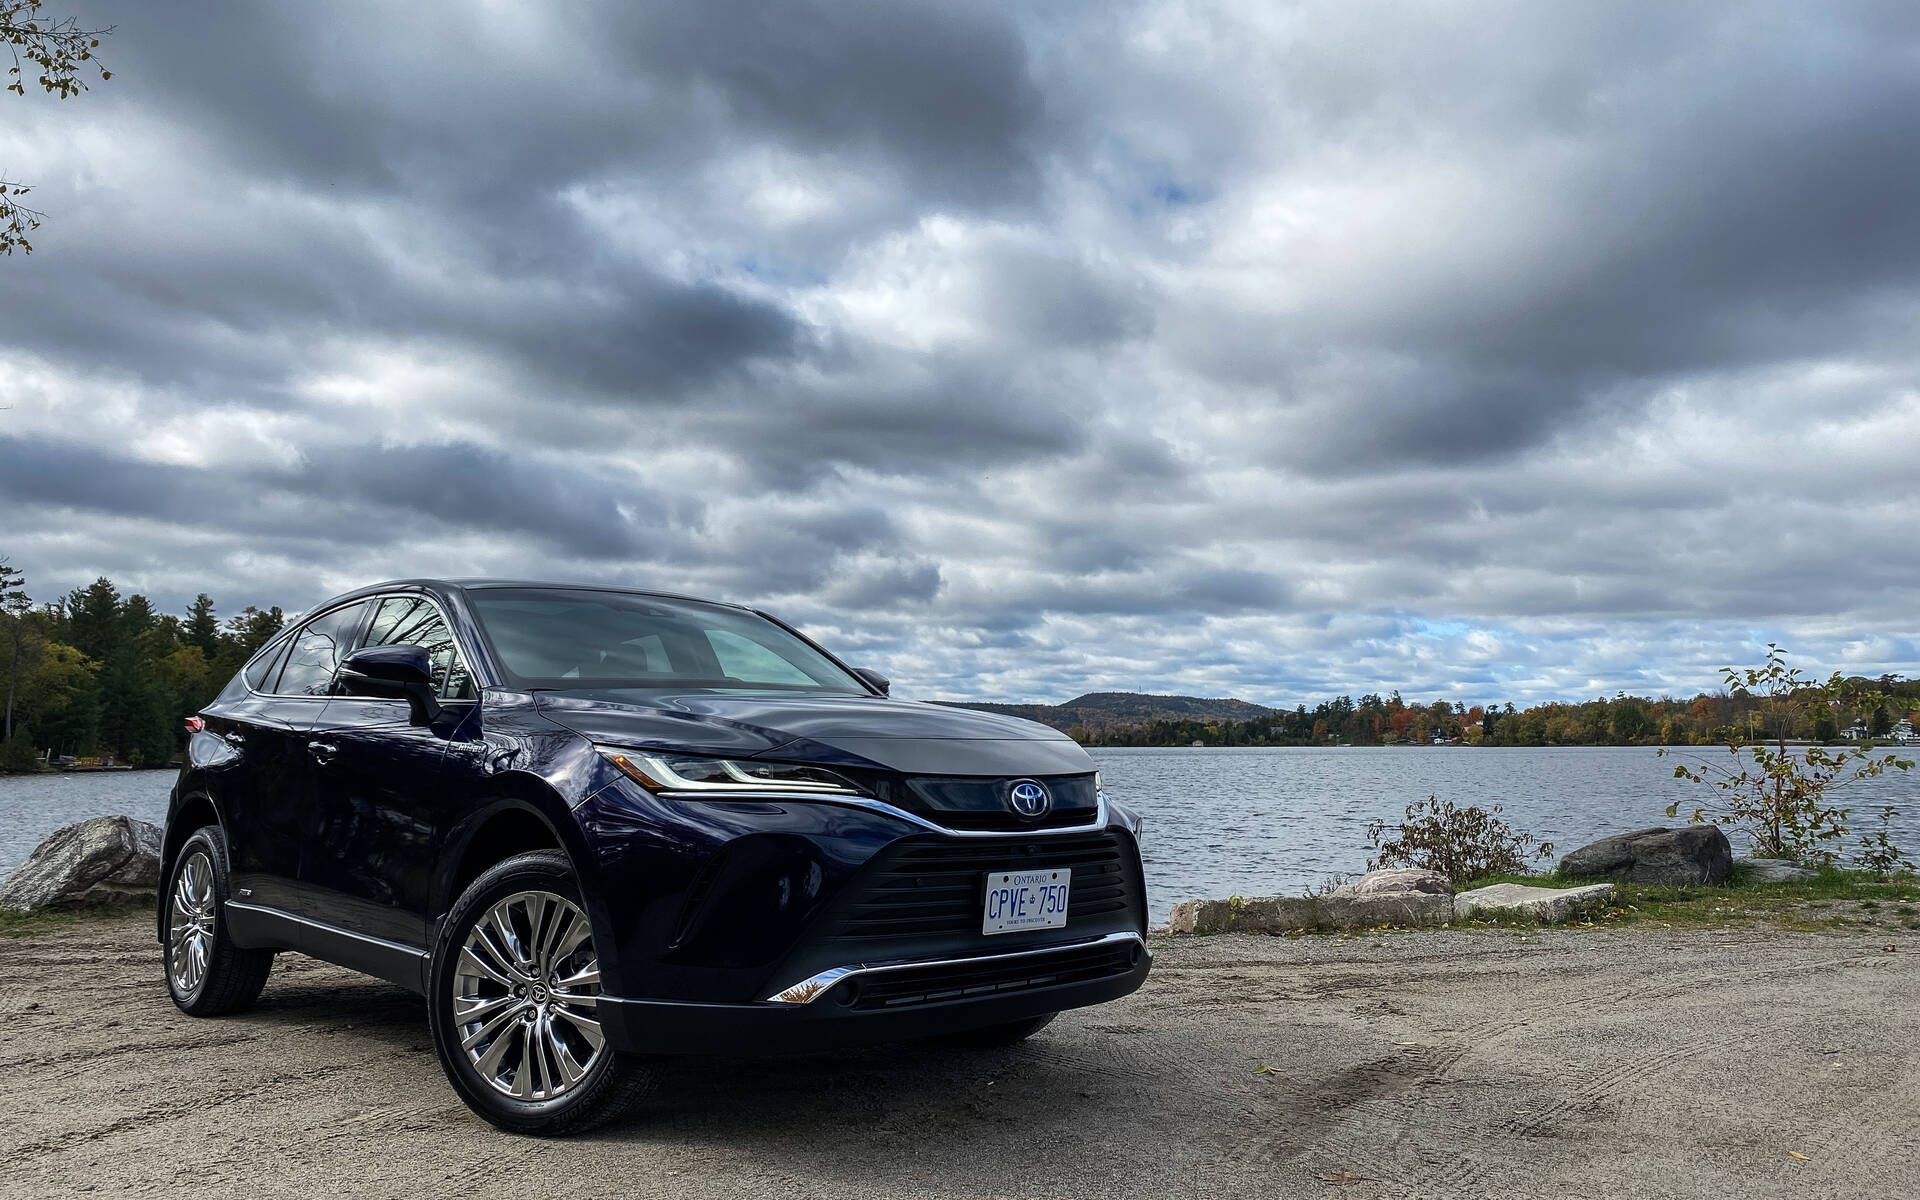 2021 Toyota Venza: From Large Camry to Halo Product - The Car Guide